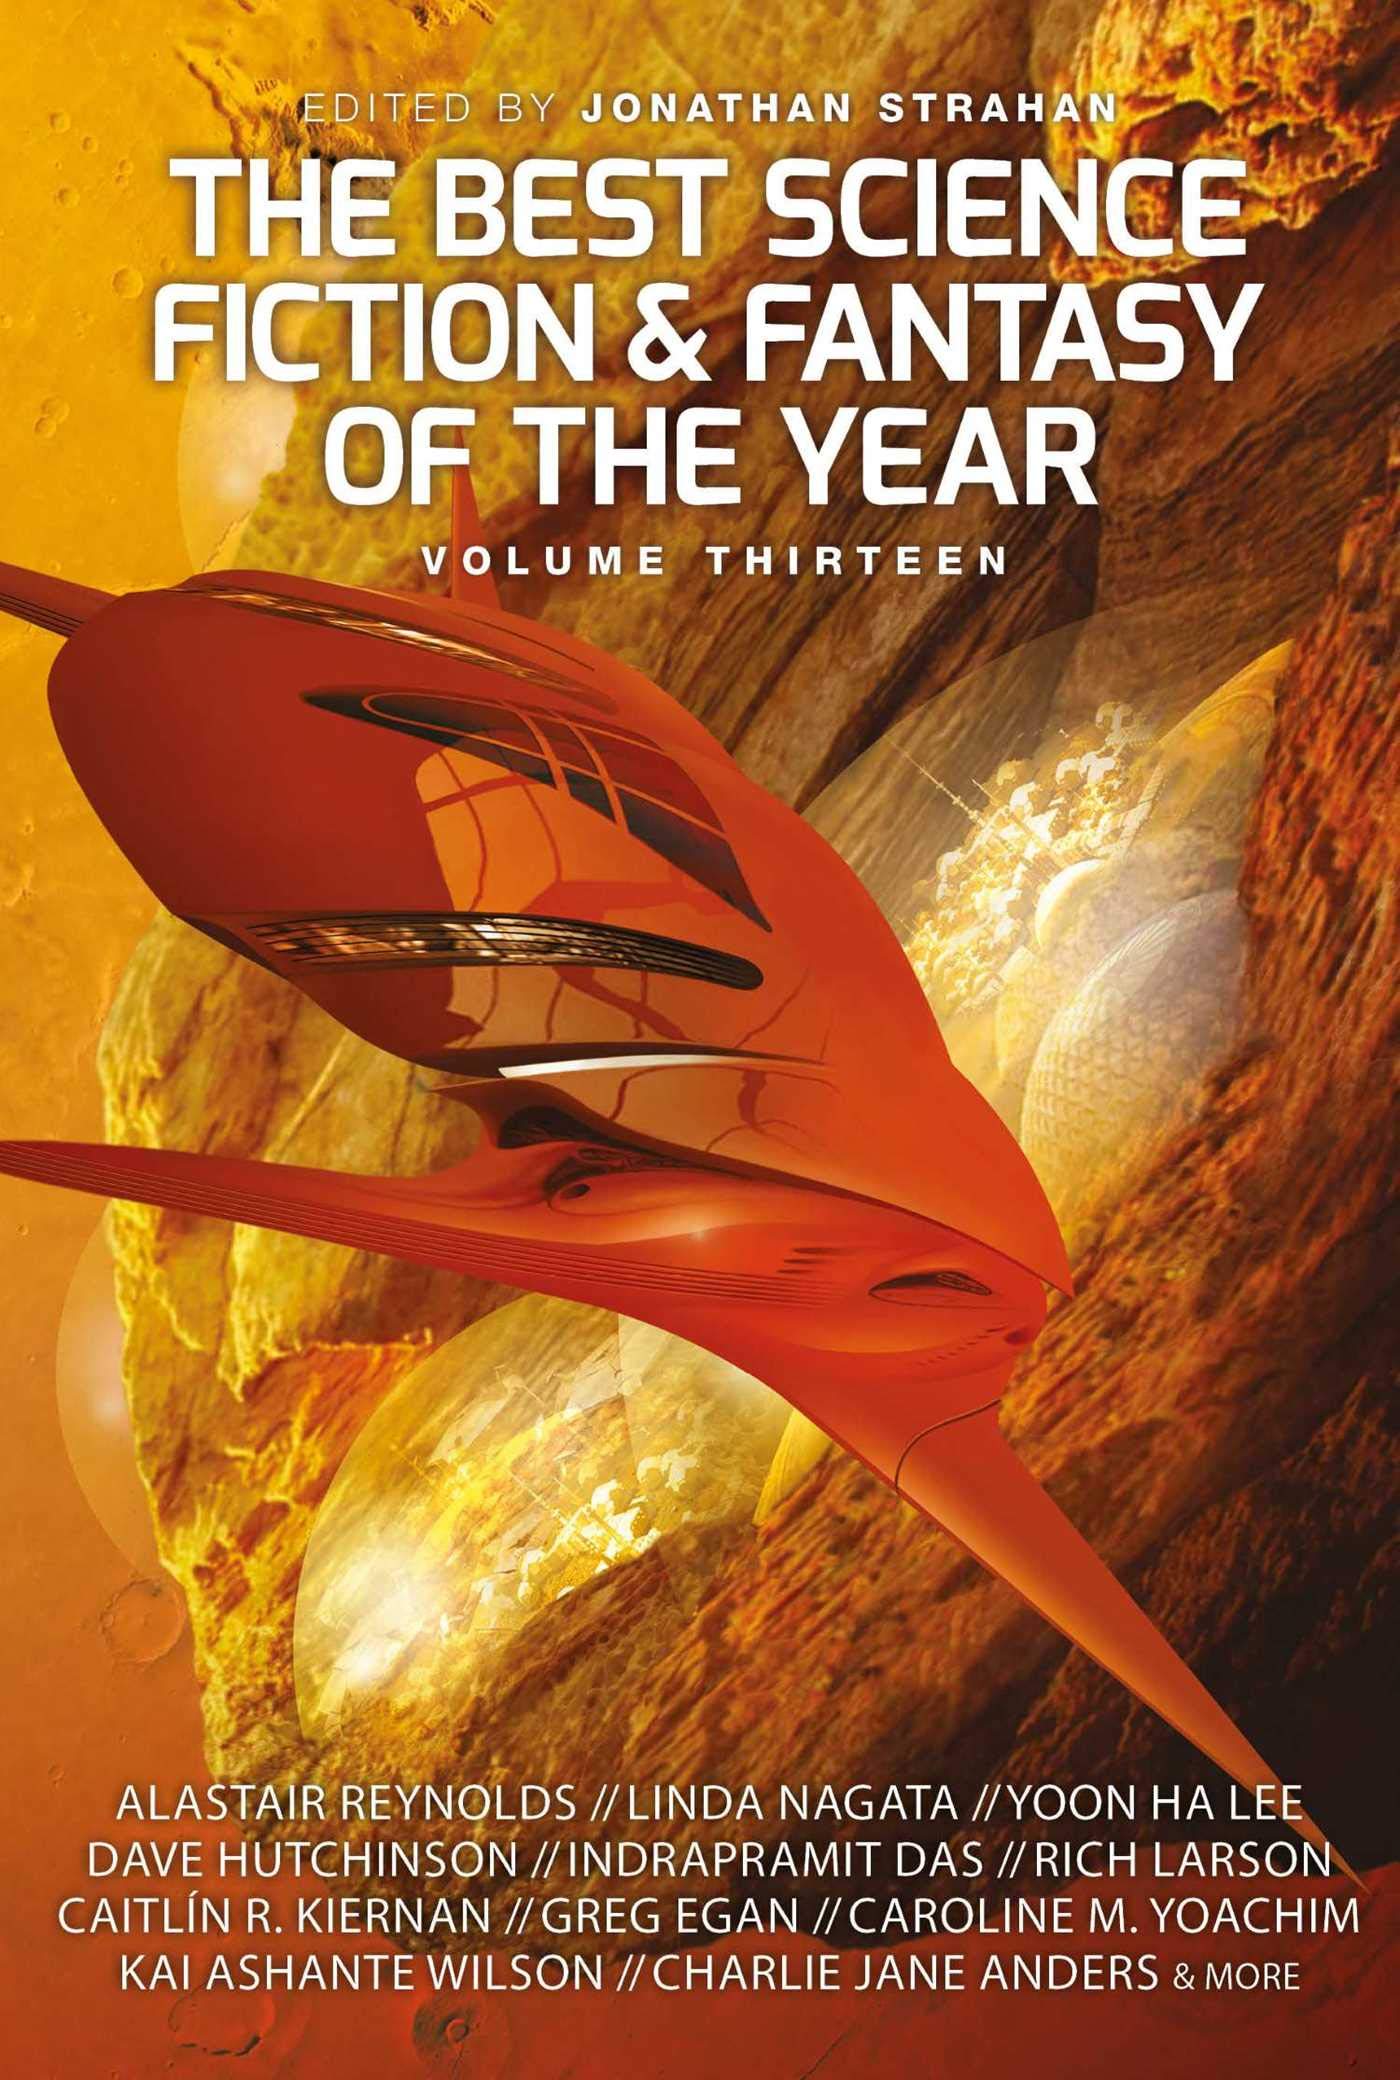 The Best Science Fiction of the Year 1 by Terry Carr